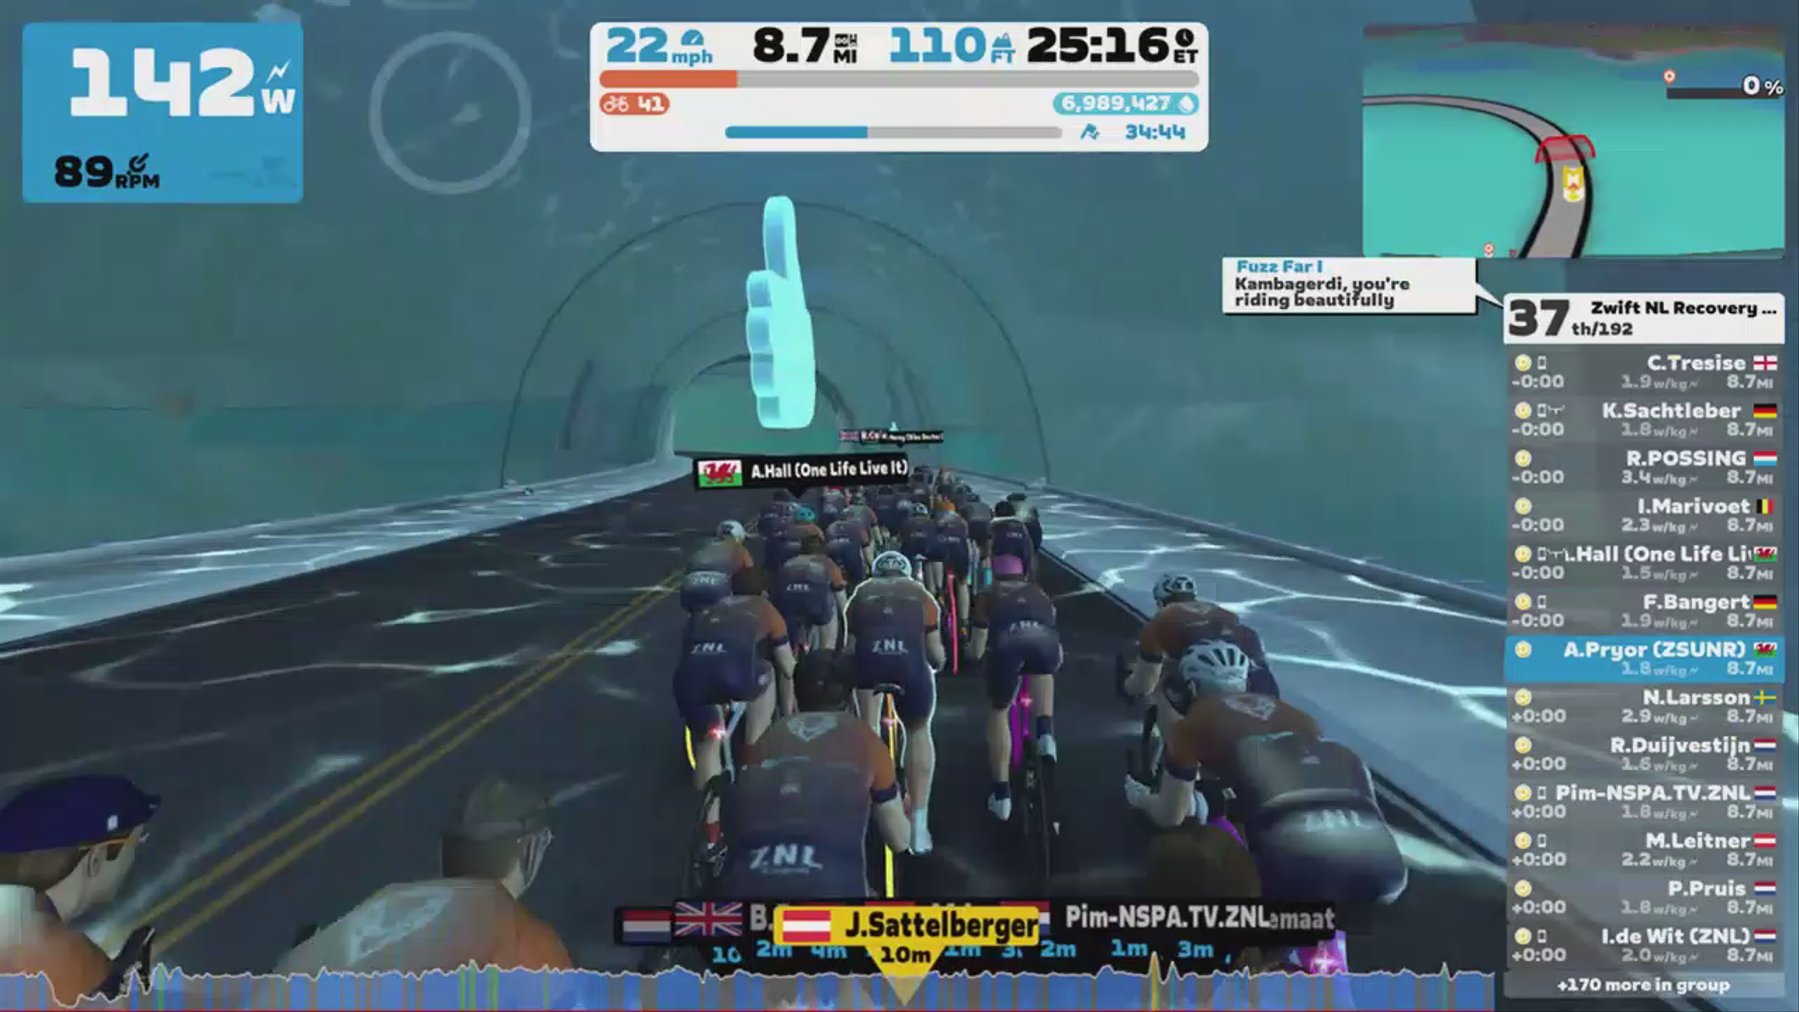 Zwift - Group Ride: Zwift NL Recovery Ride (D) on Tick Tock in Watopia